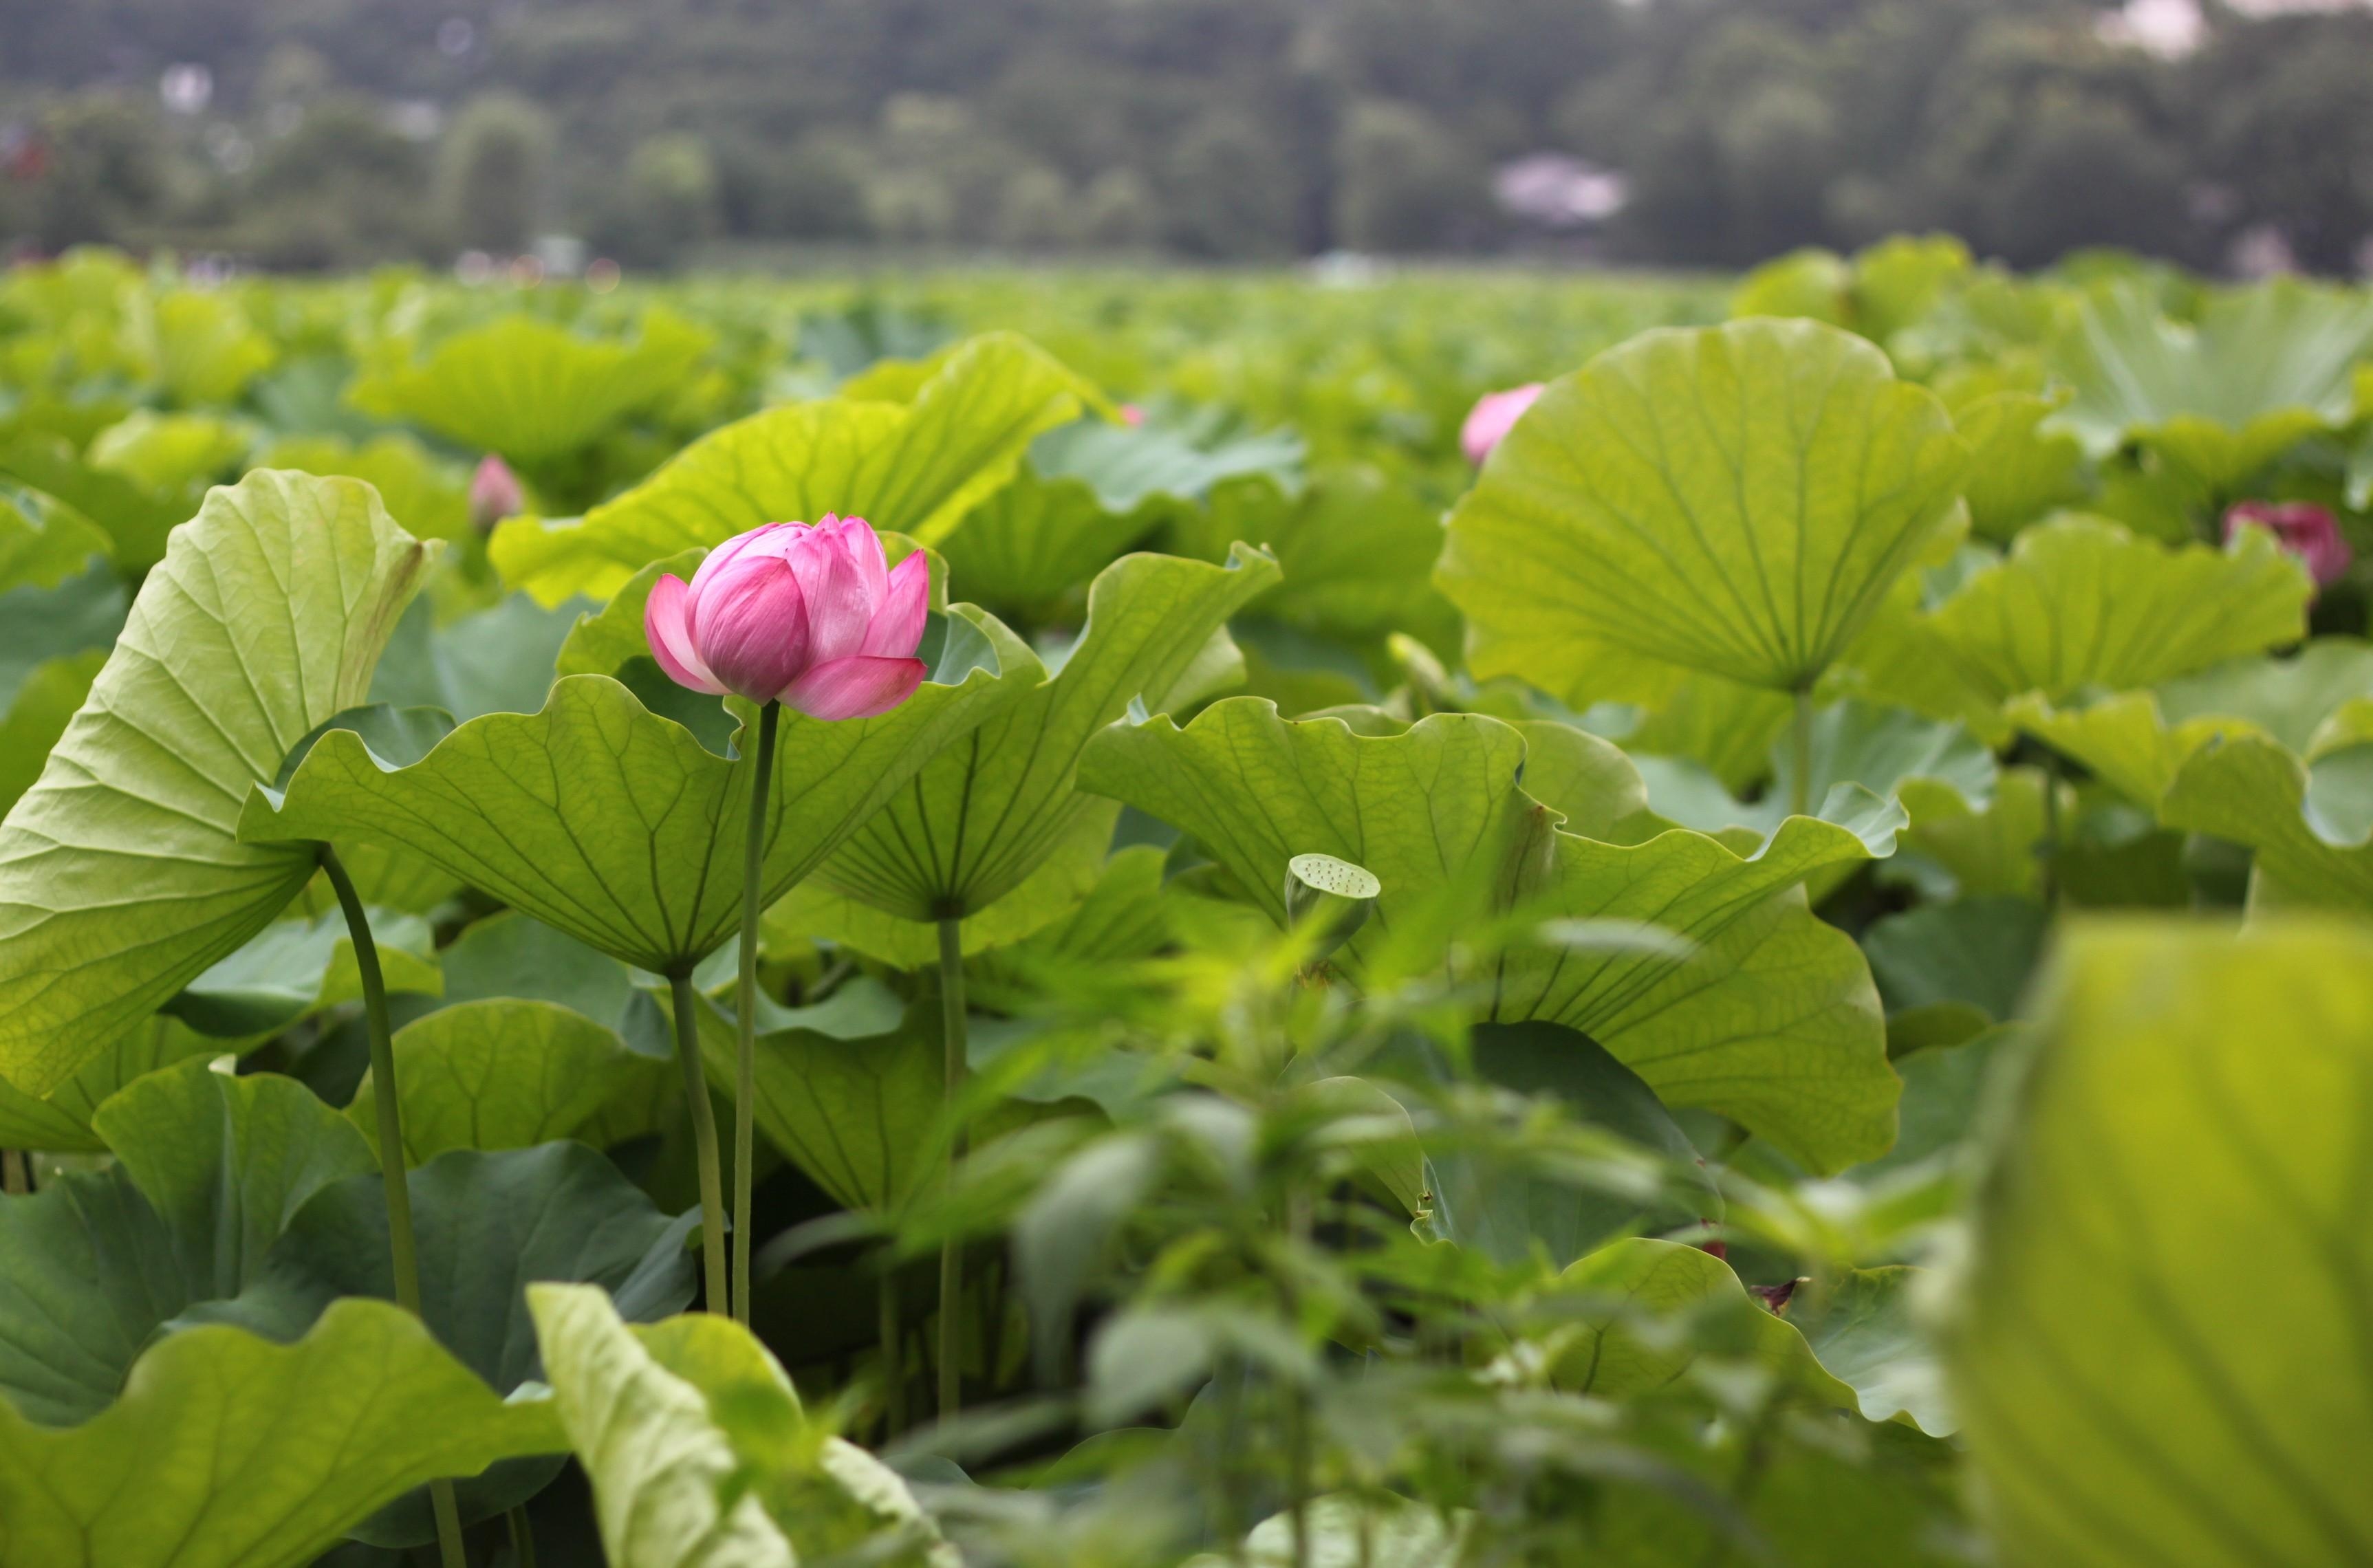 greens, flowers, leaves, sharpness, lotuses for android